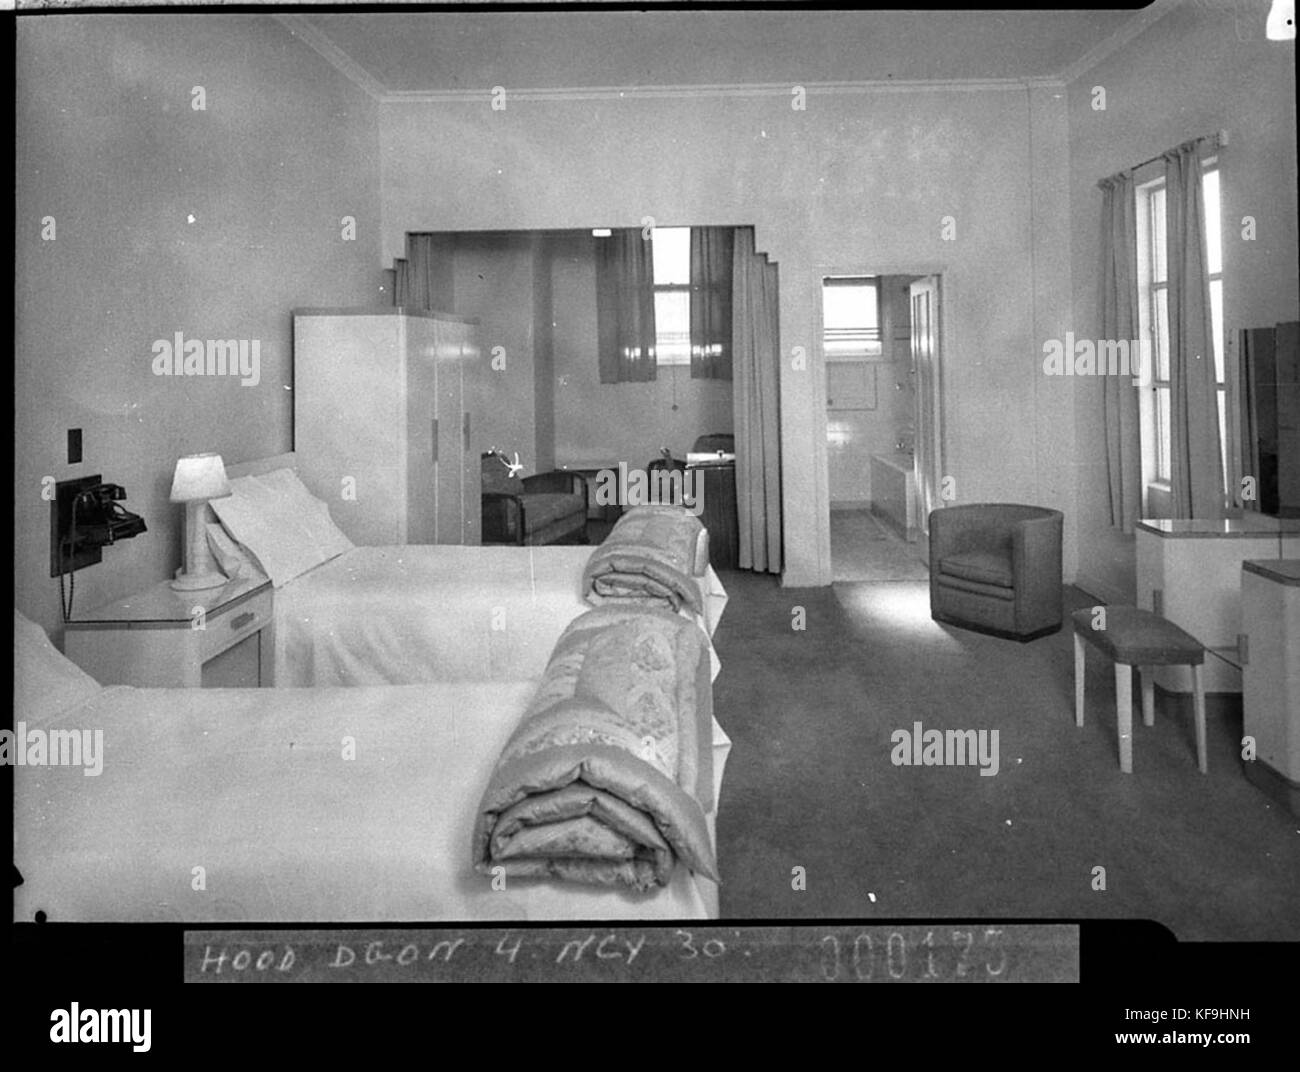 11917 One of the bedrooms showing bathroom and twin beds Wentworth Hotel Brewster Manderson architects Stock Photo